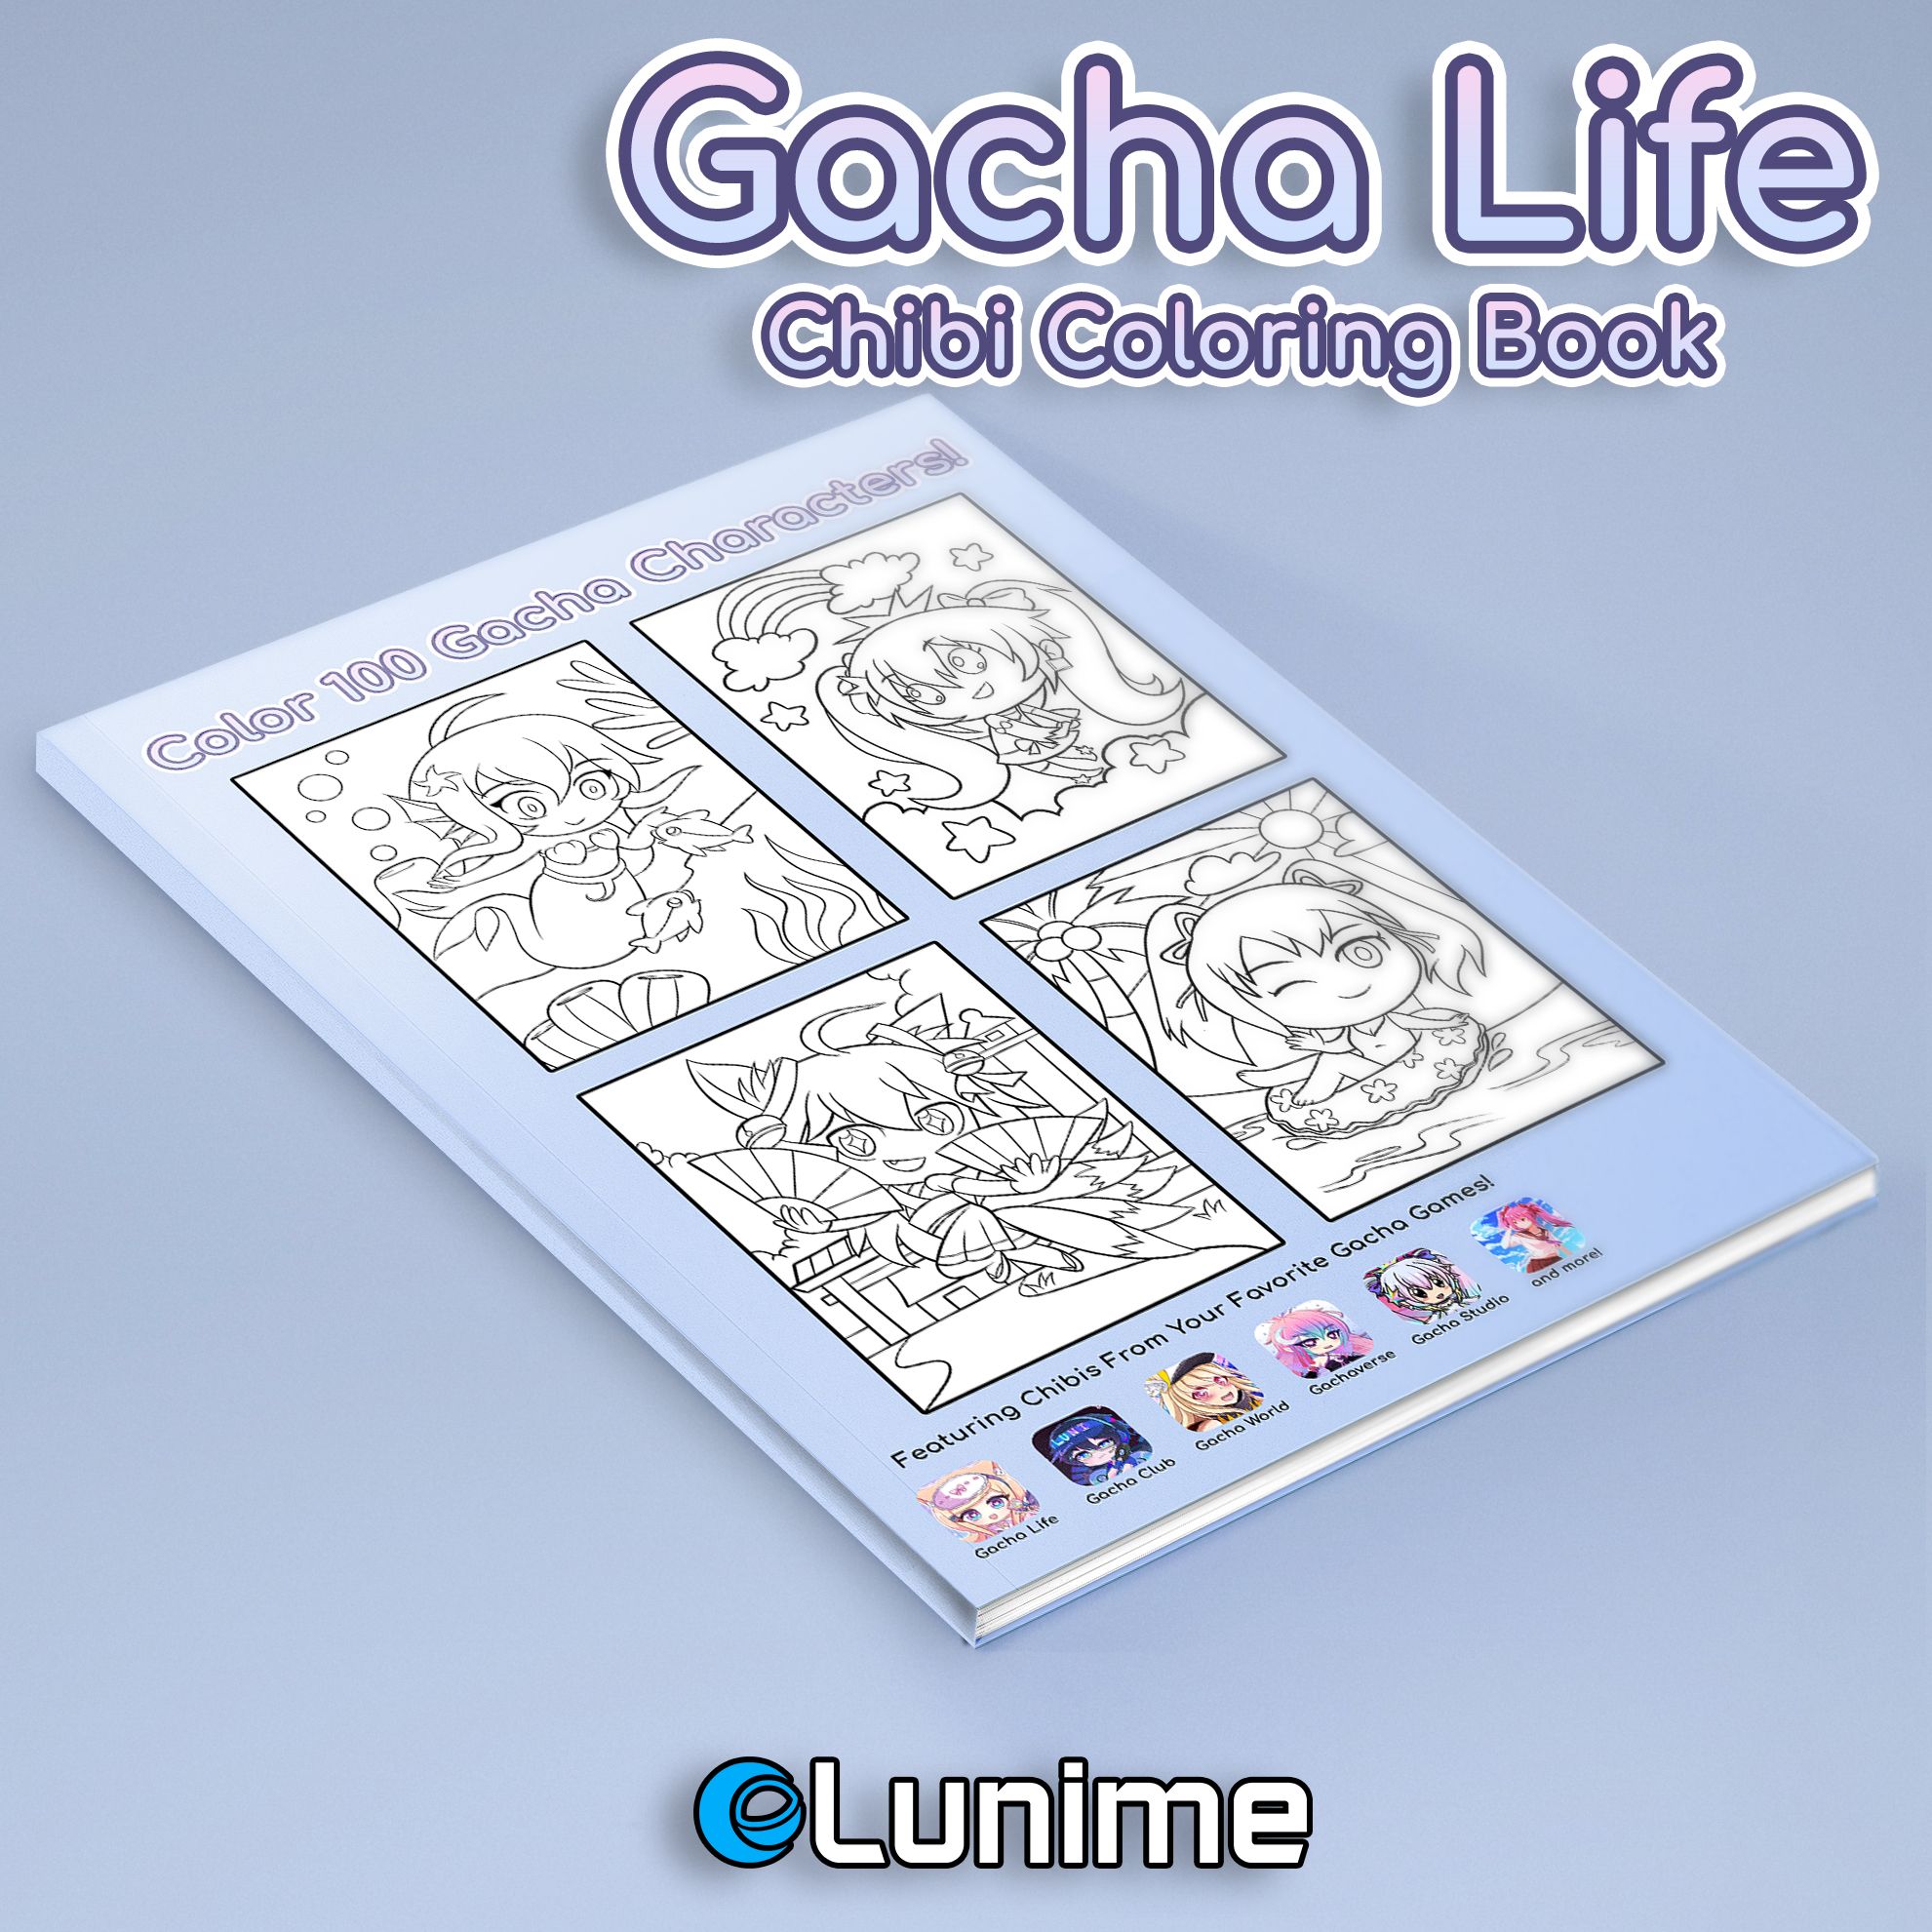 Lunime Exciting News Today We Are Releasing A Gacha Life Chibi Coloring Book Filled With Illustrations Of Characters From All Of Your Favorite Gacha Games This Coloring Book Will Keep